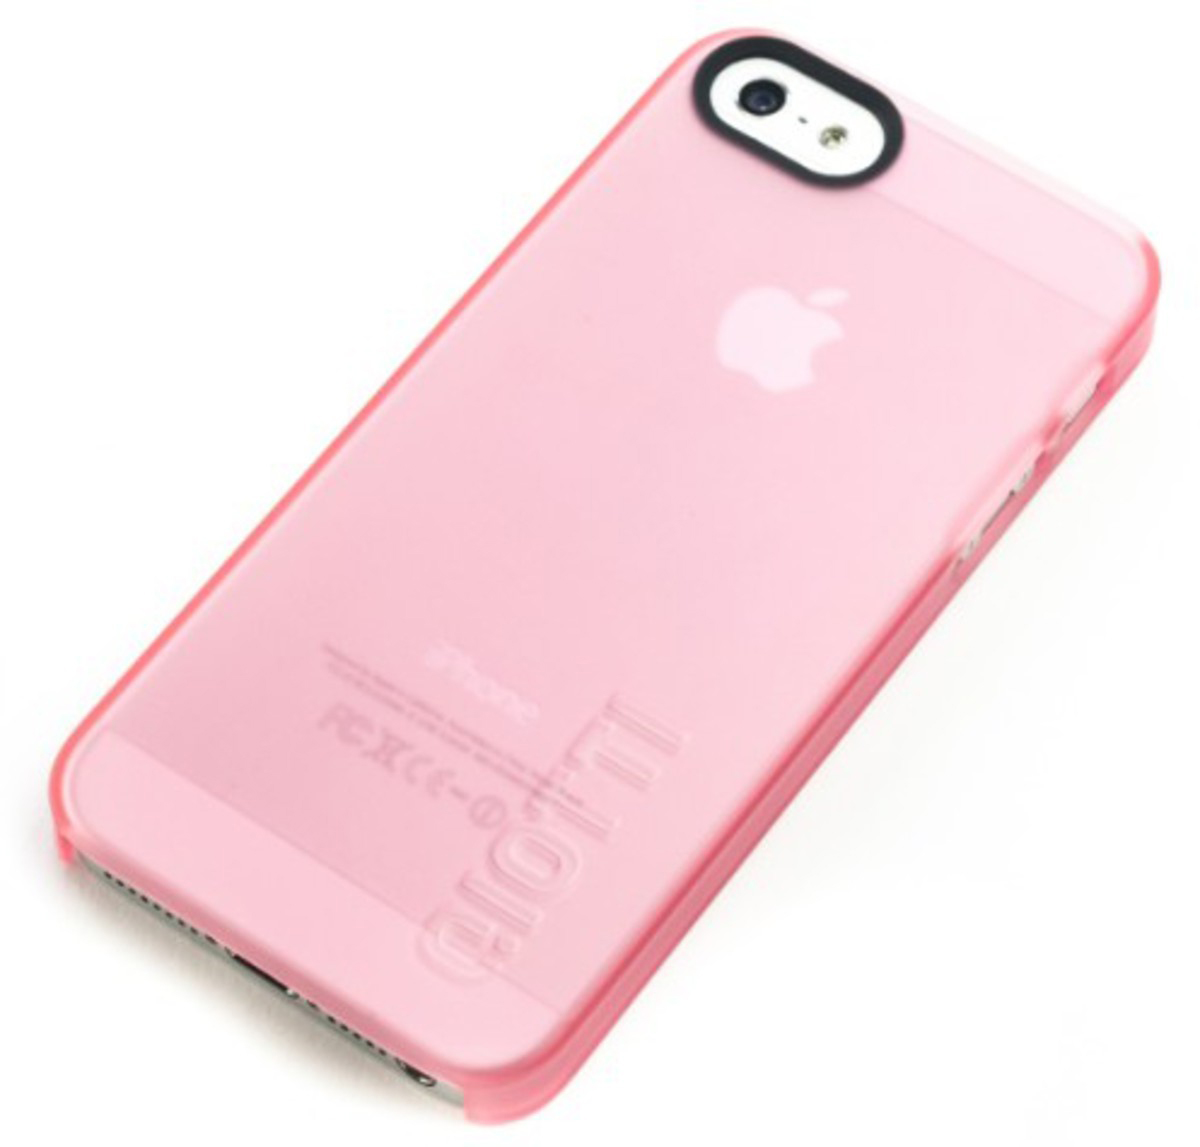 QIOTTI Q1002123 Curves iPhone Frozen Rosa 5s, 5, iPhone Cover, Apple